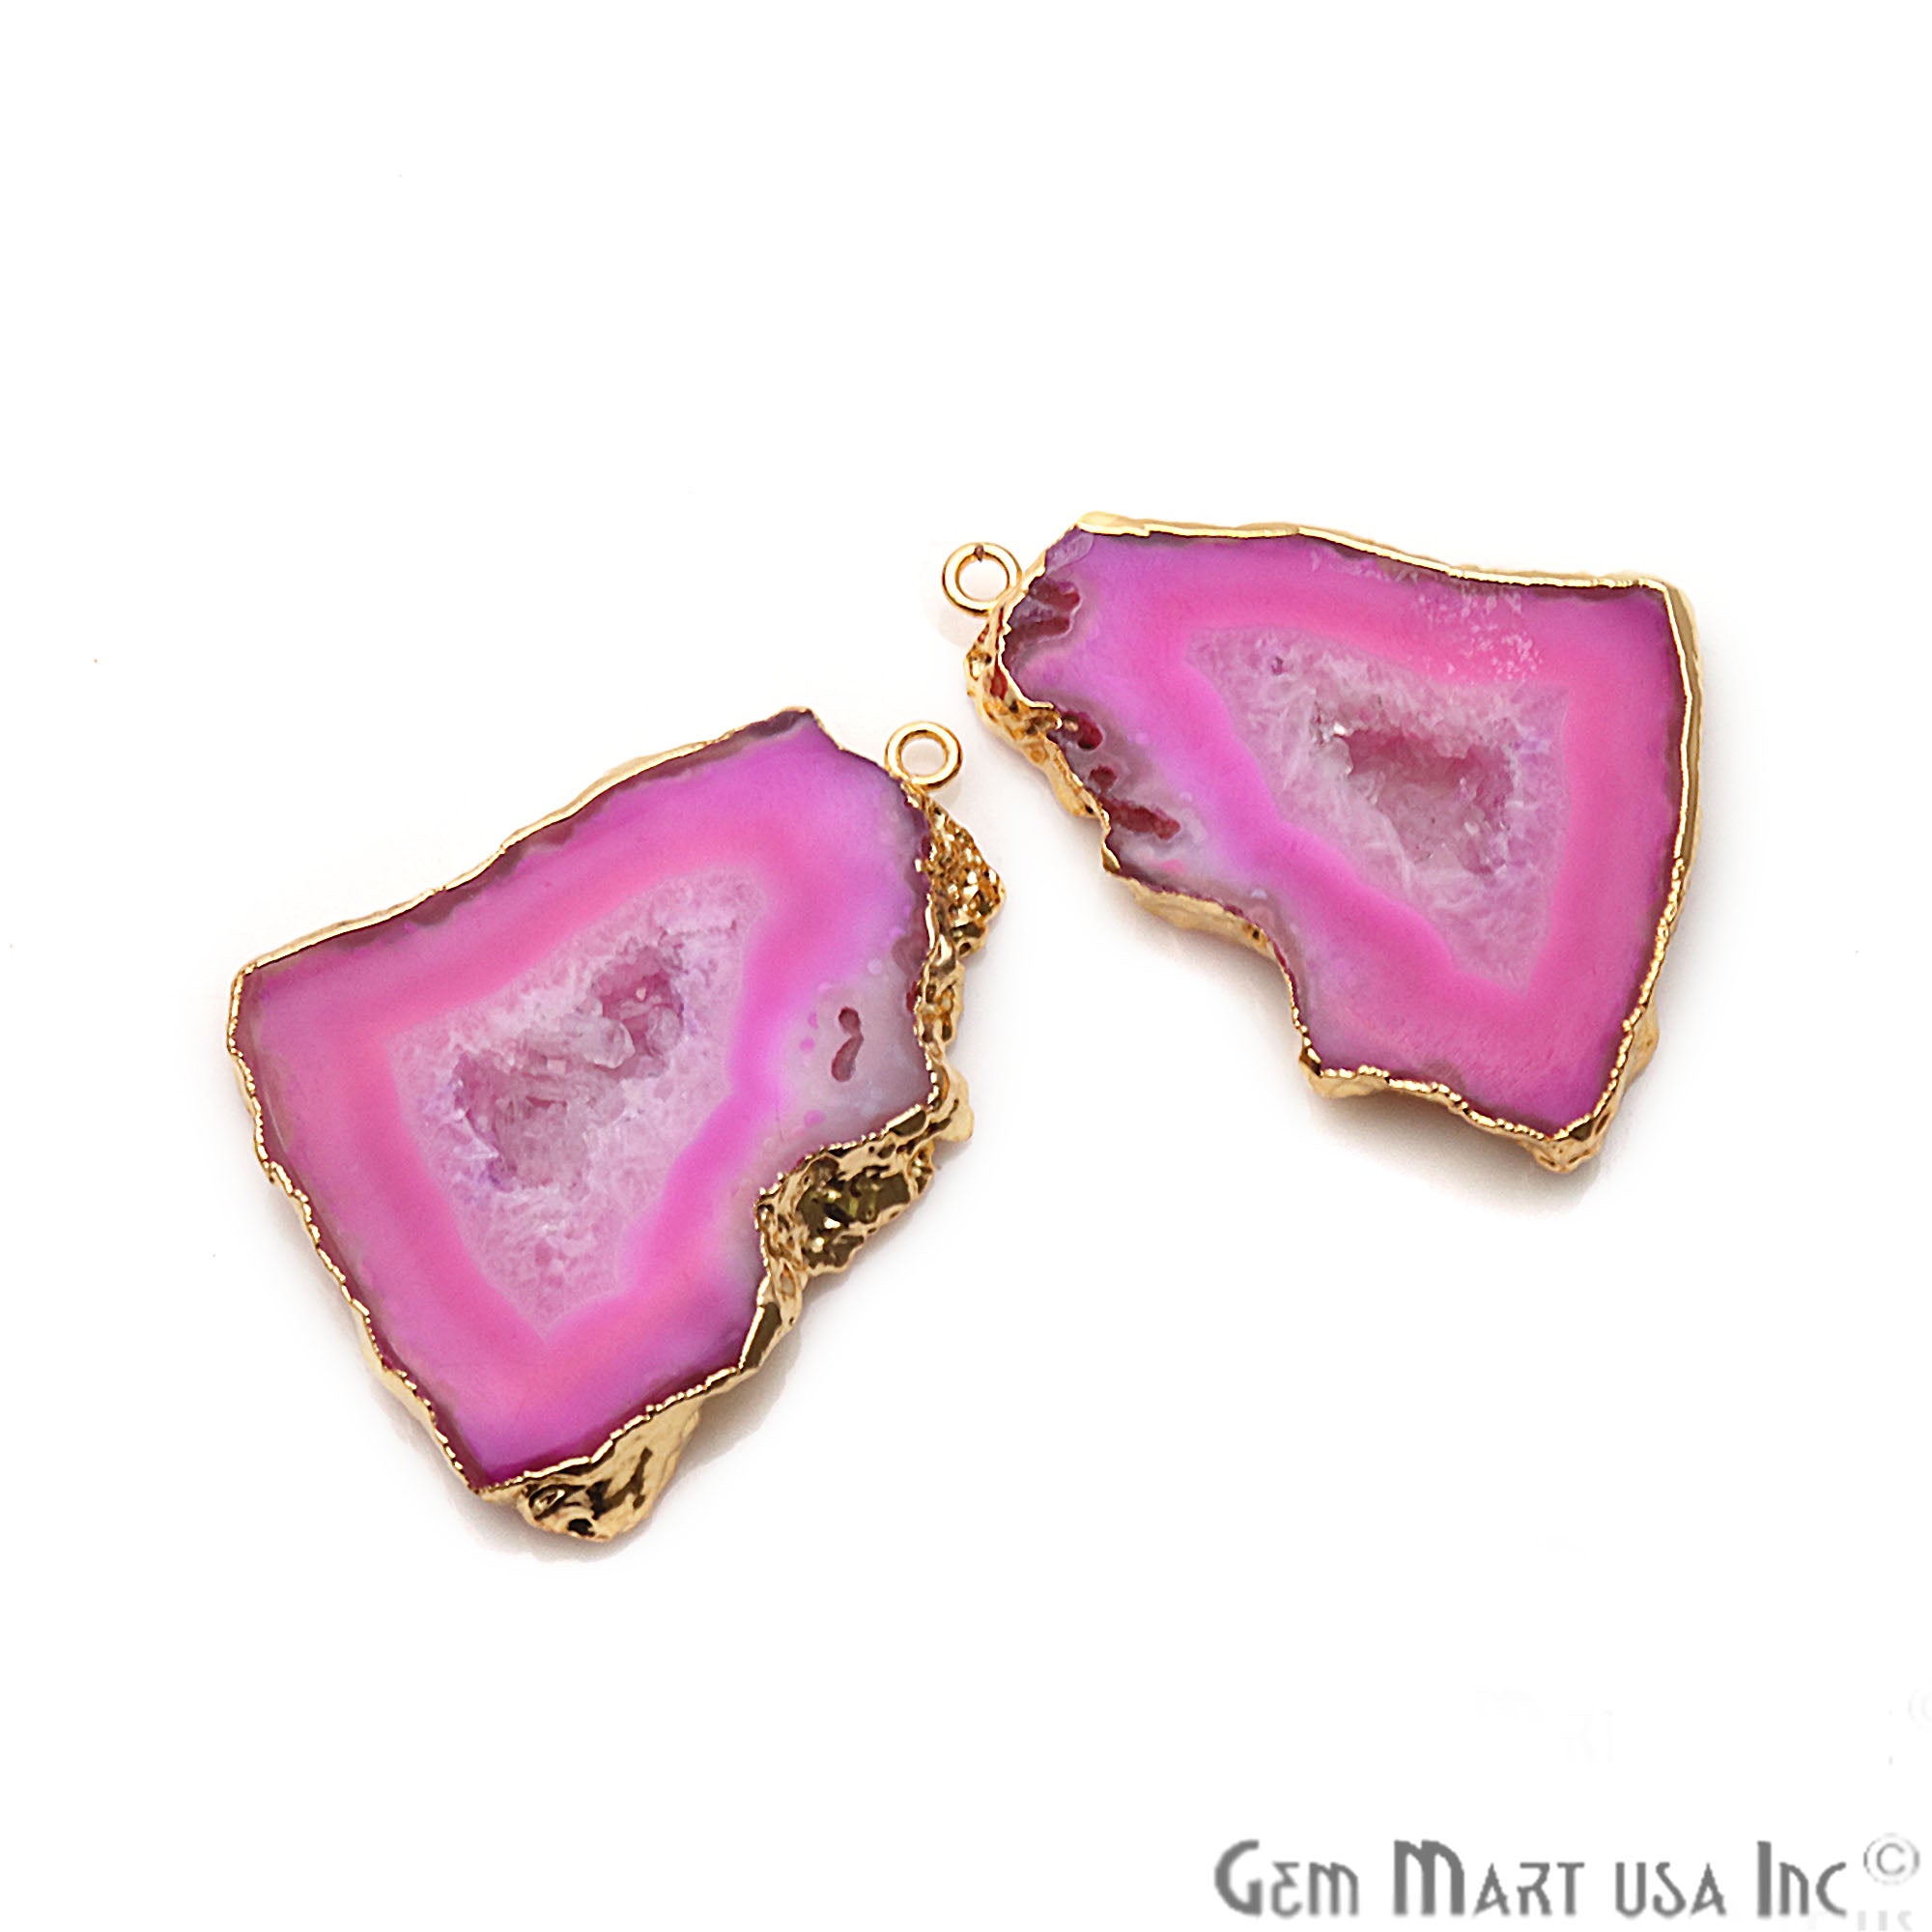 Agate Slice 32x41mm Organic Gold Electroplated Gemstone Earring Connector 1 Pair - GemMartUSA